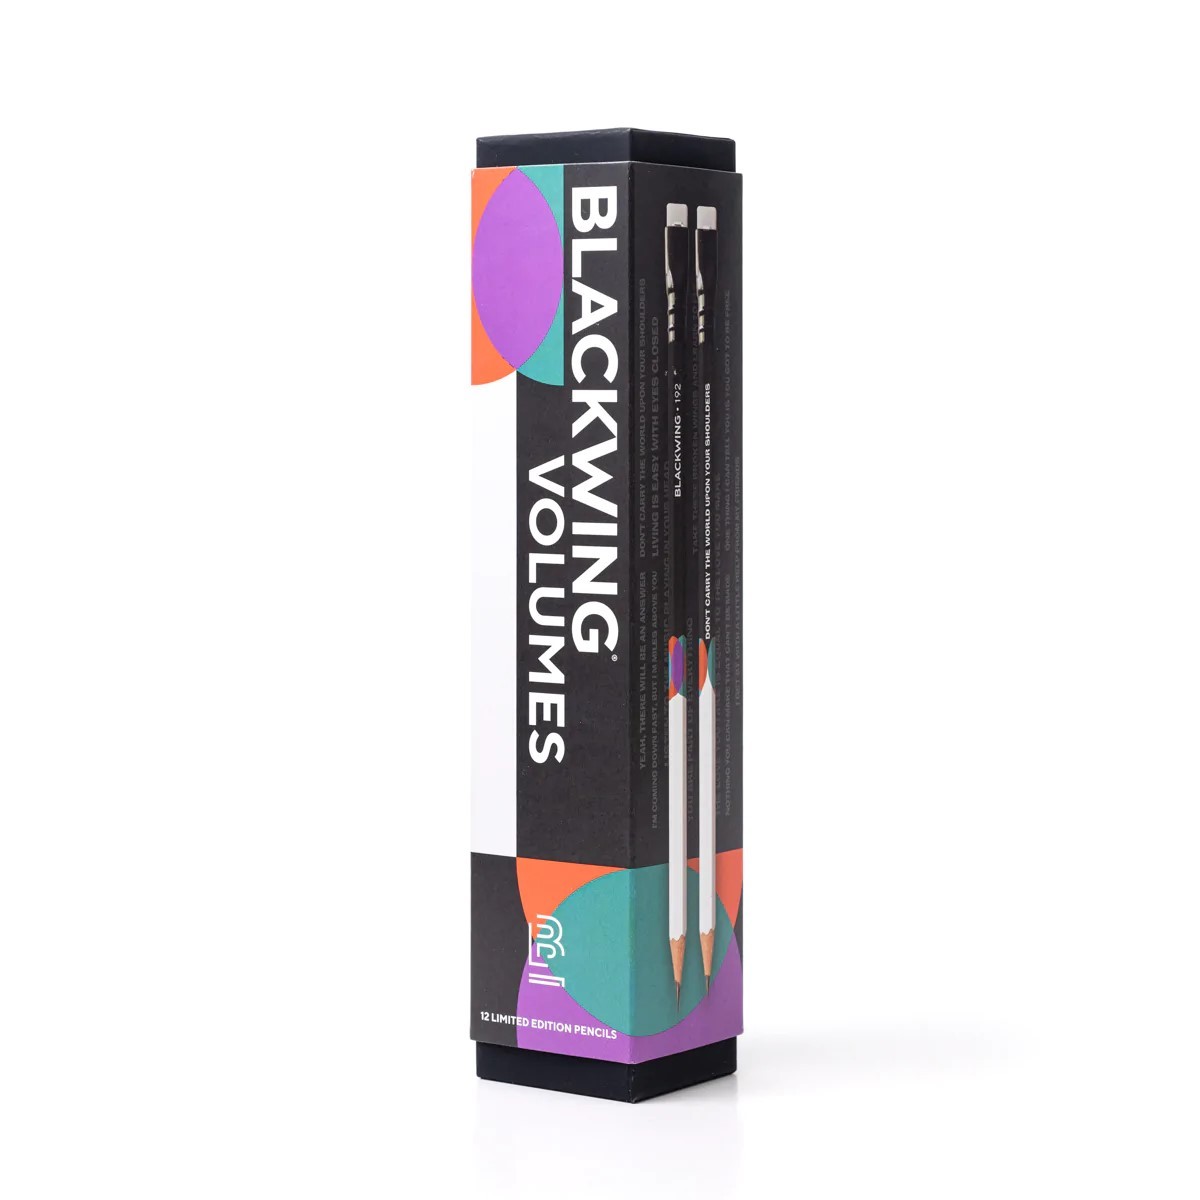 Blackwing Volume 192 Tribute To Lennon And McCartney Box Of 12